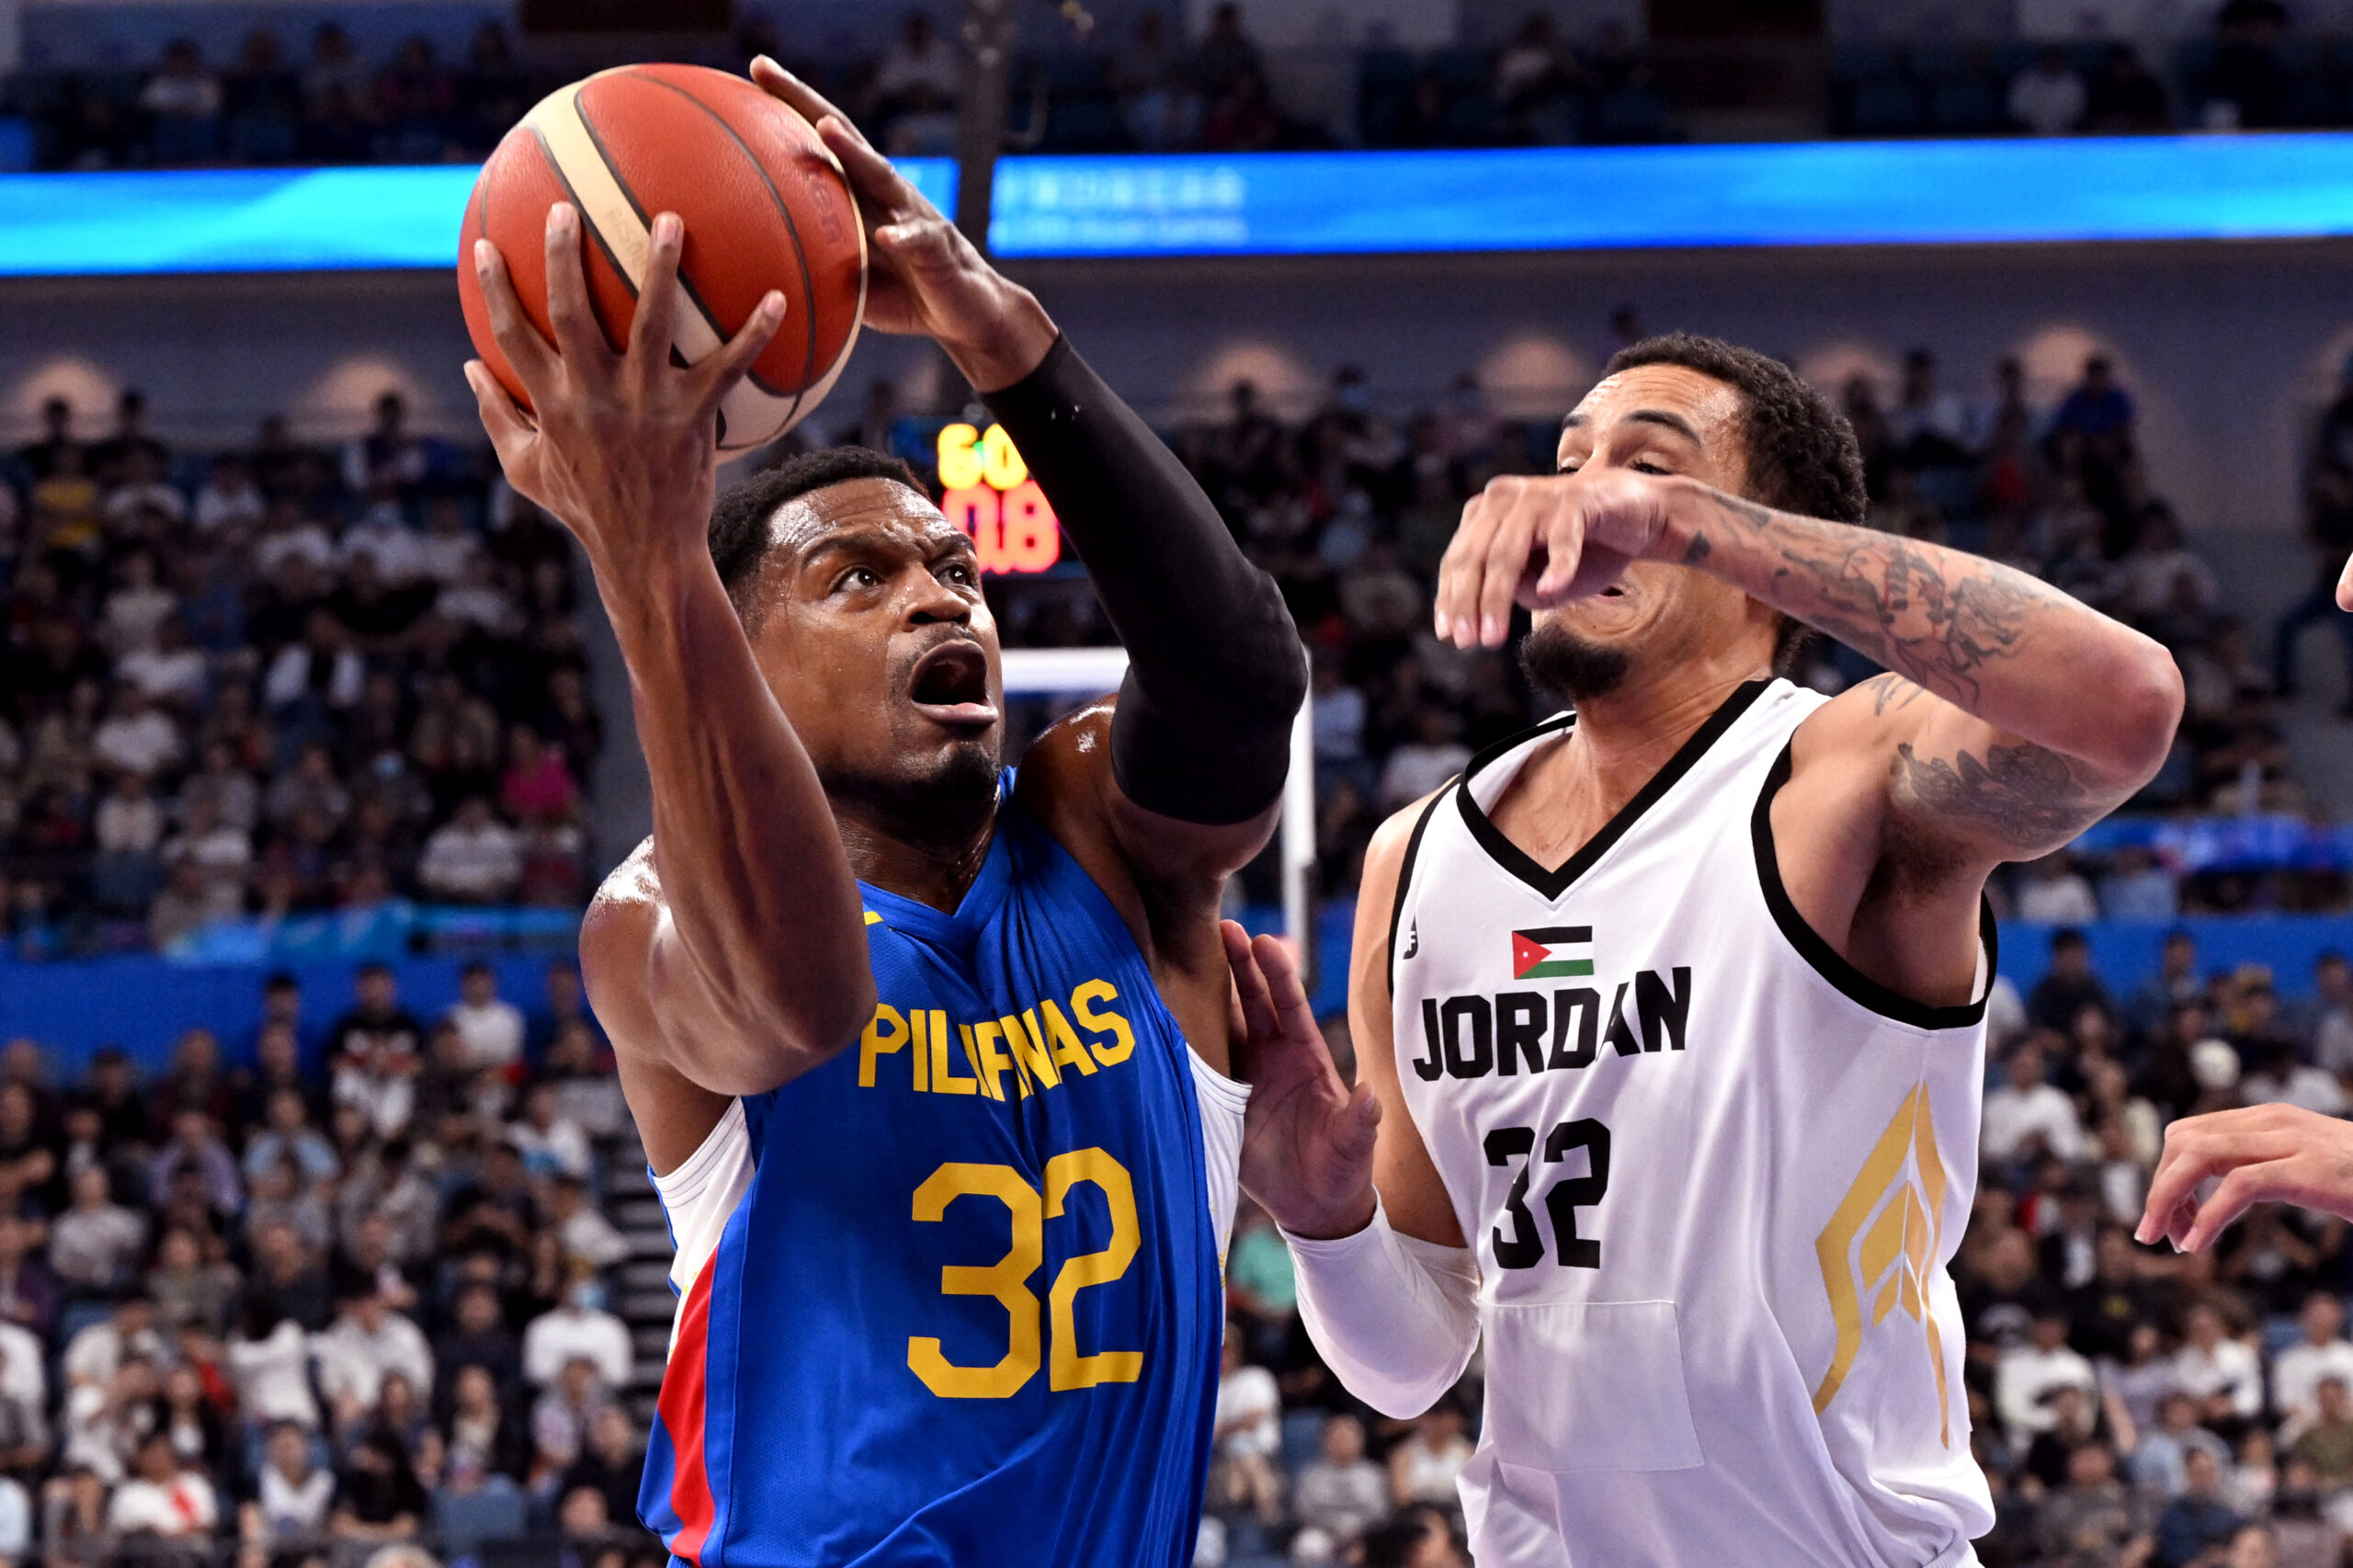 Philippines' player Justin Brownlee (L) is challenged by Jordan's John Bohannon during the men's gold medal basketball game between Jordan and Philippines at the 2022 Asian Games in Hangzhou in China's eastern Zhejiang province on October 6, 2023. (Photo by William WEST / AFP)